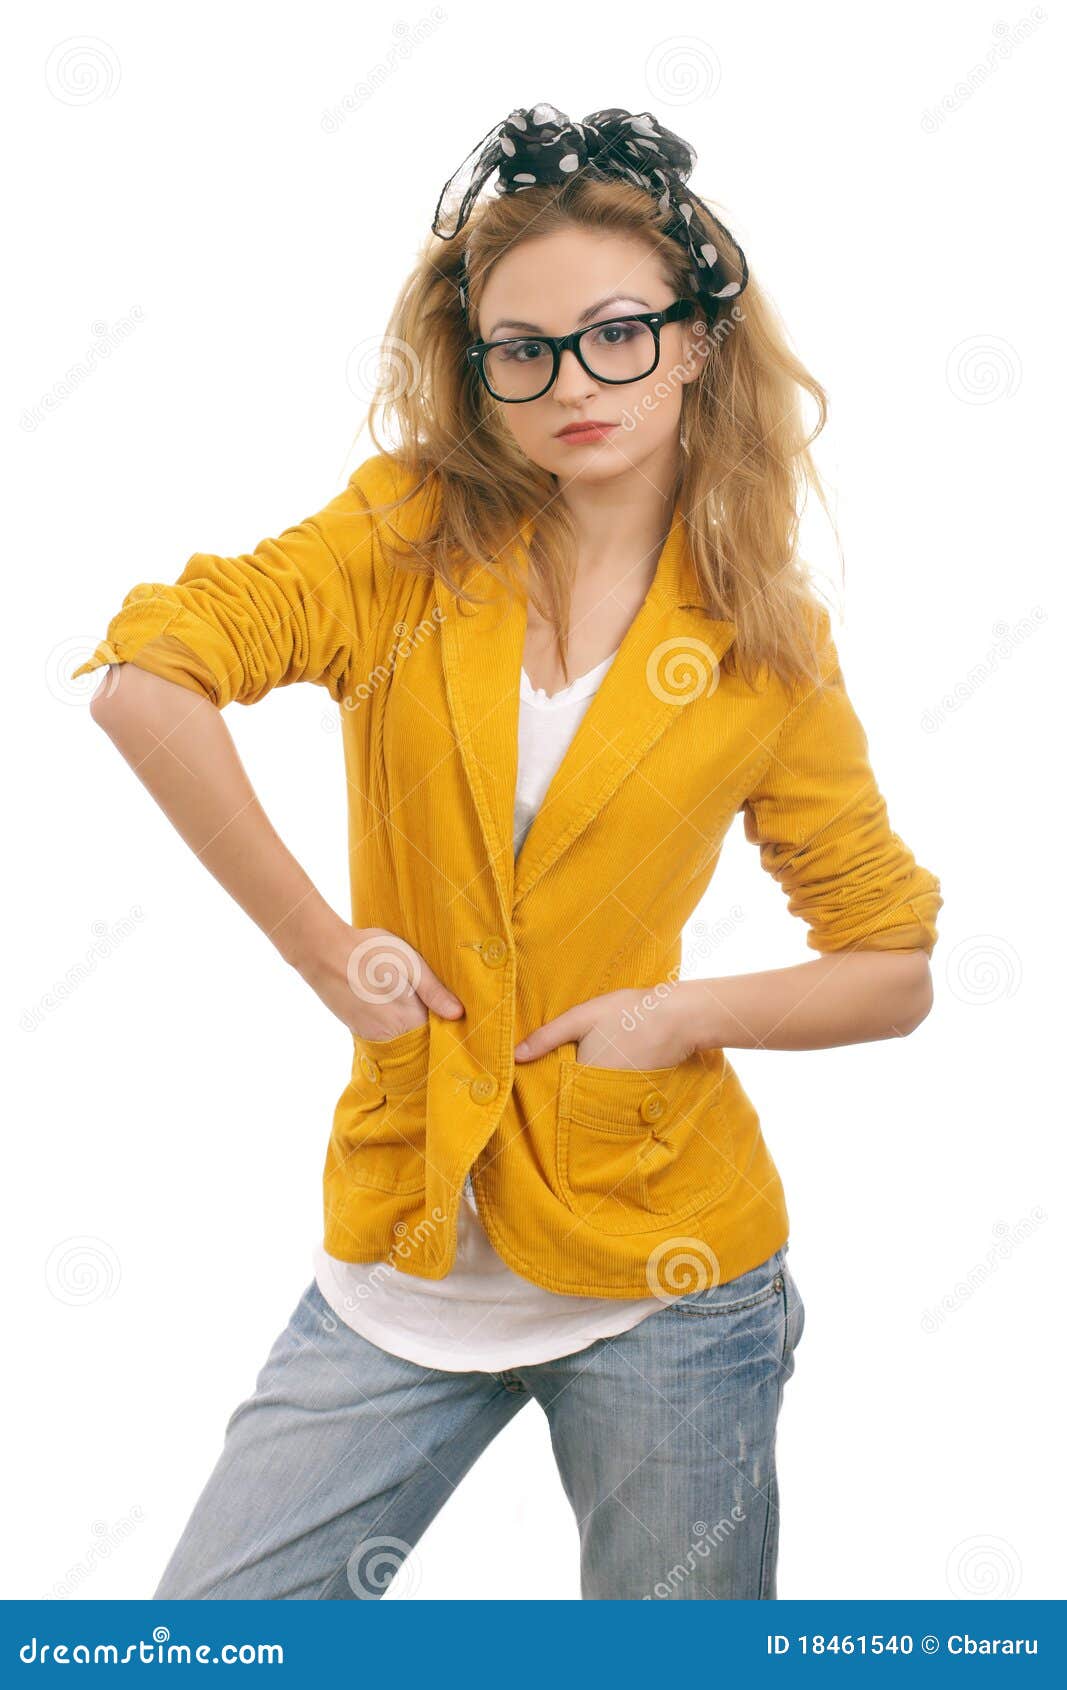 Cute Blonde Teen Model with Glasses Stock Photo - Image of looking ...